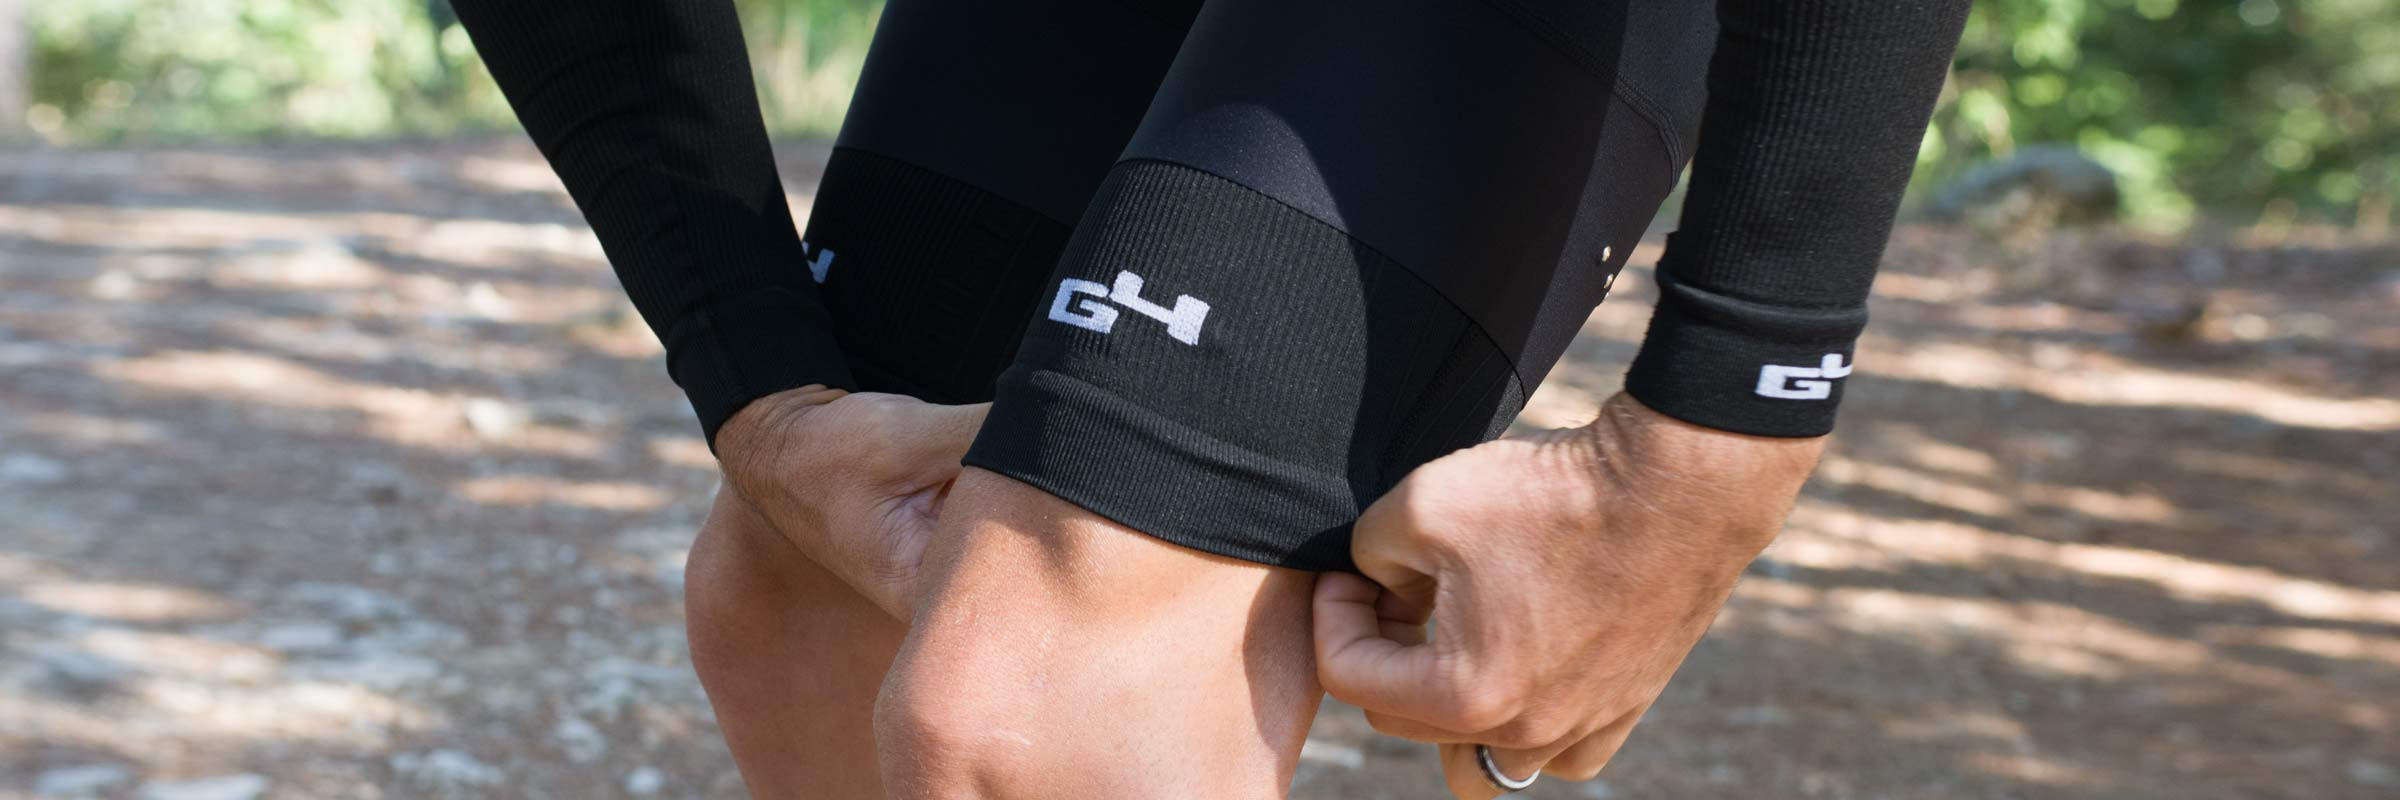 Women's cycling legs and armes warmers - G4 dimension